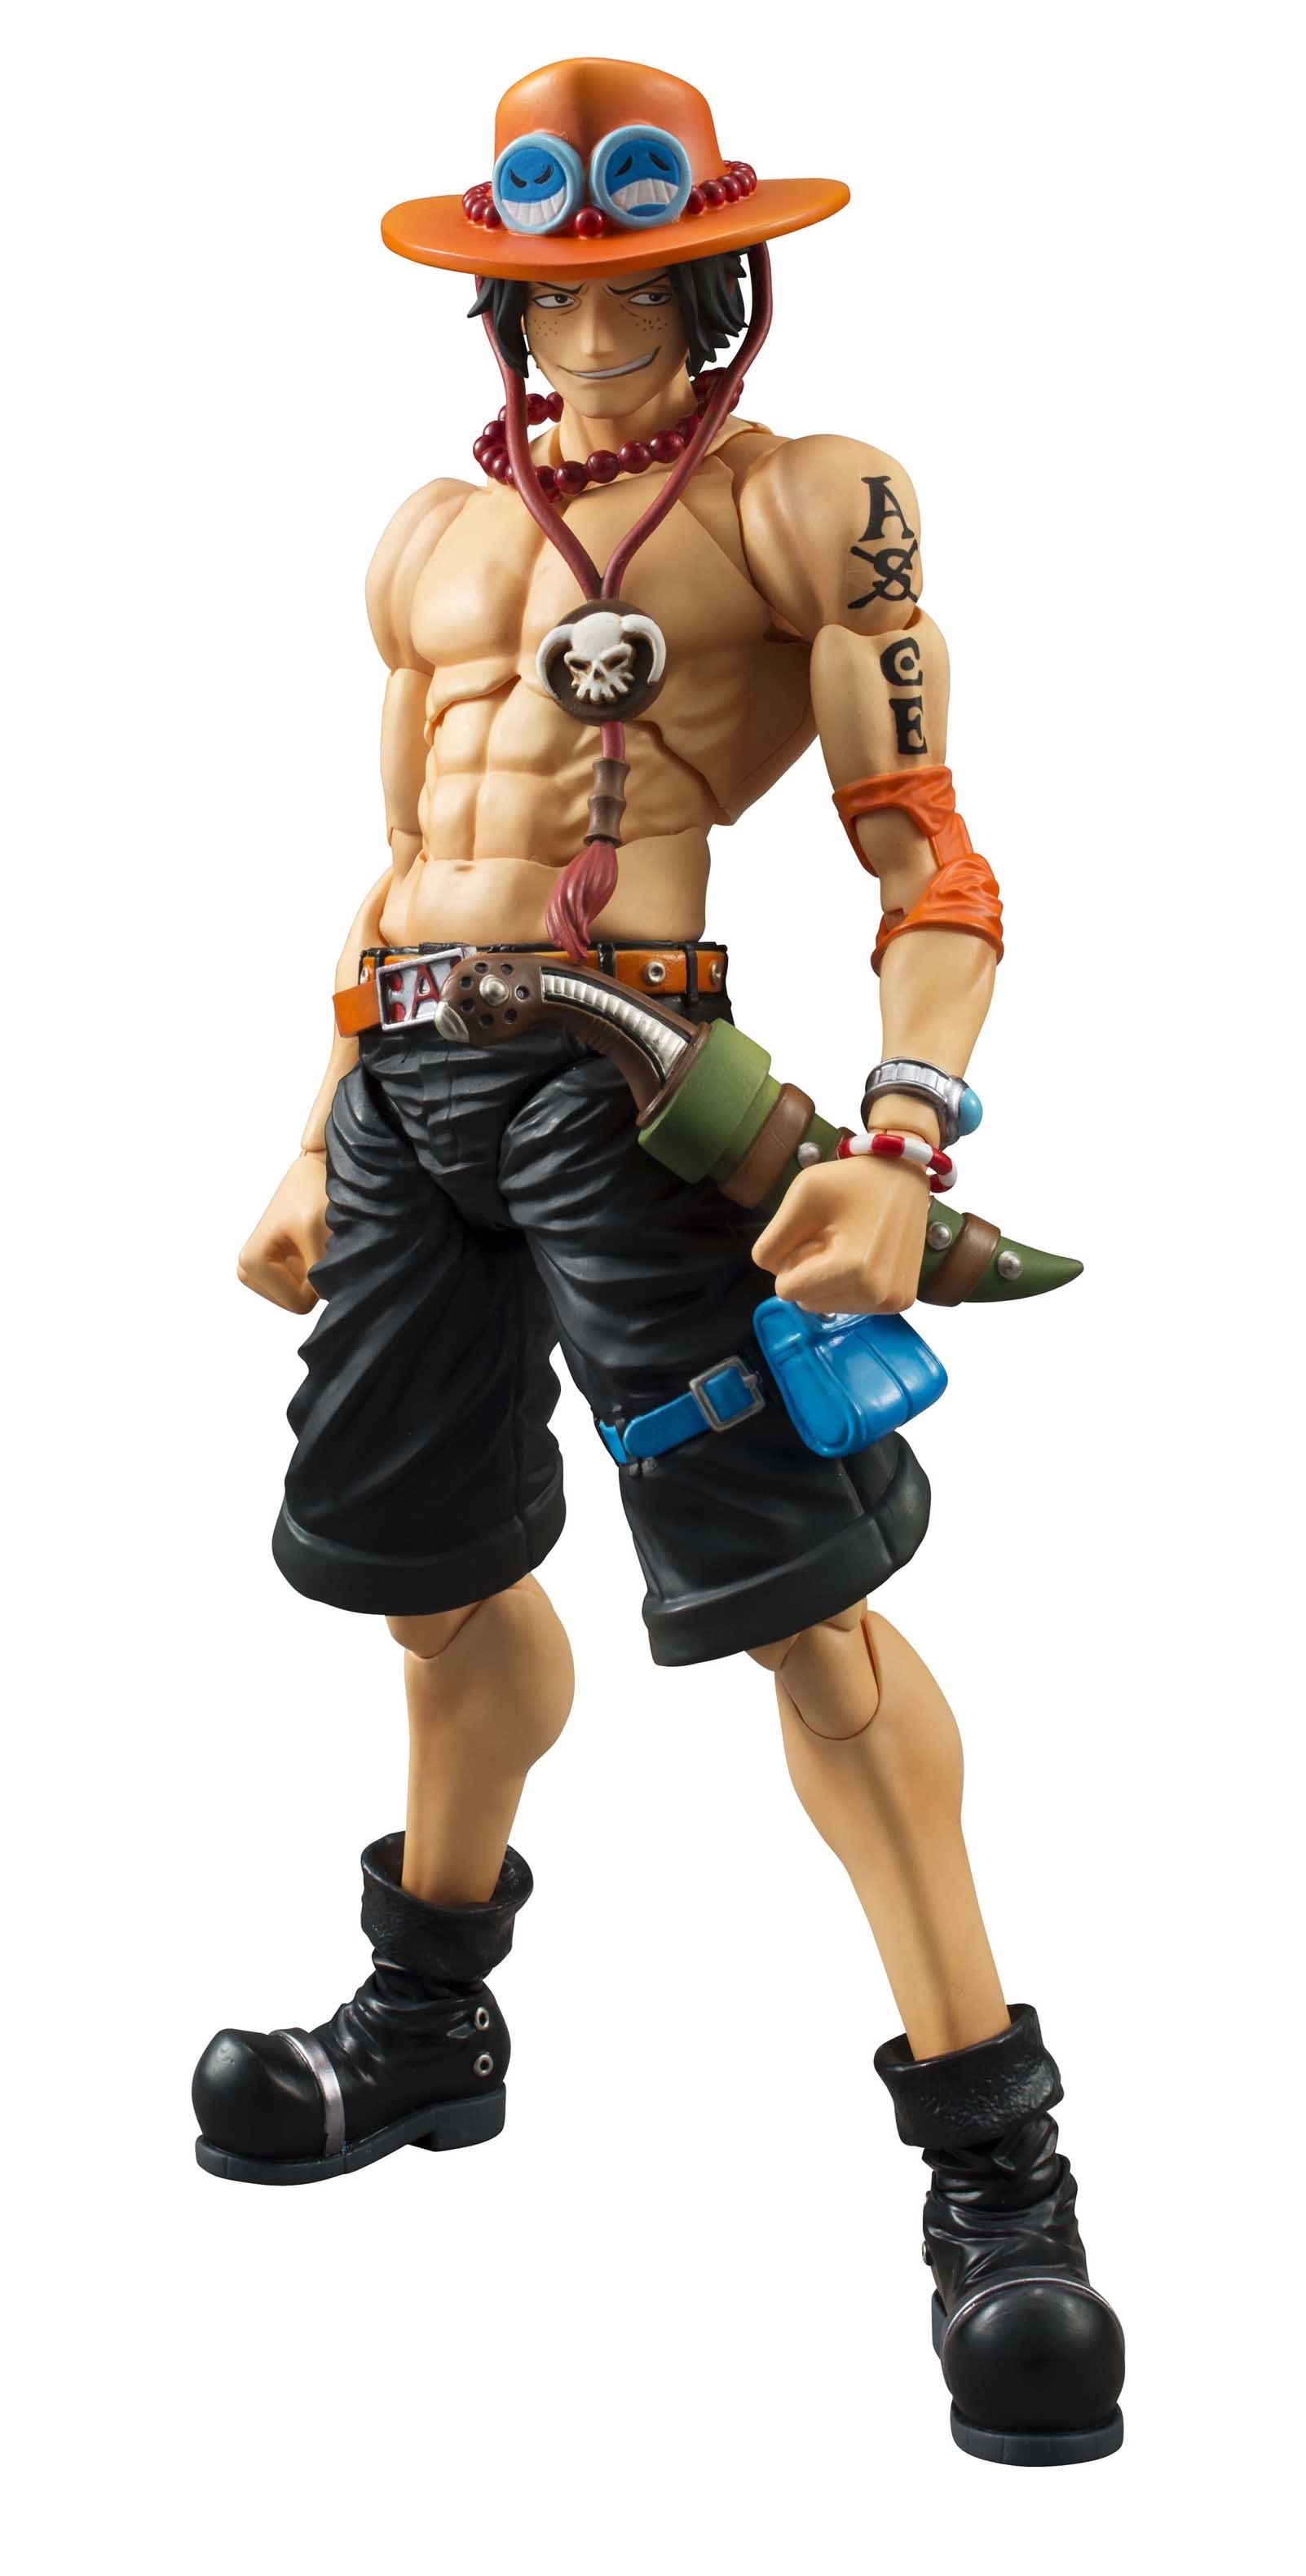 ACTION FIGURE ONE PIECE - PORTGAS D. ACE - VARIABLE ACTION HEROES REF.:  834233 - Preech Informática